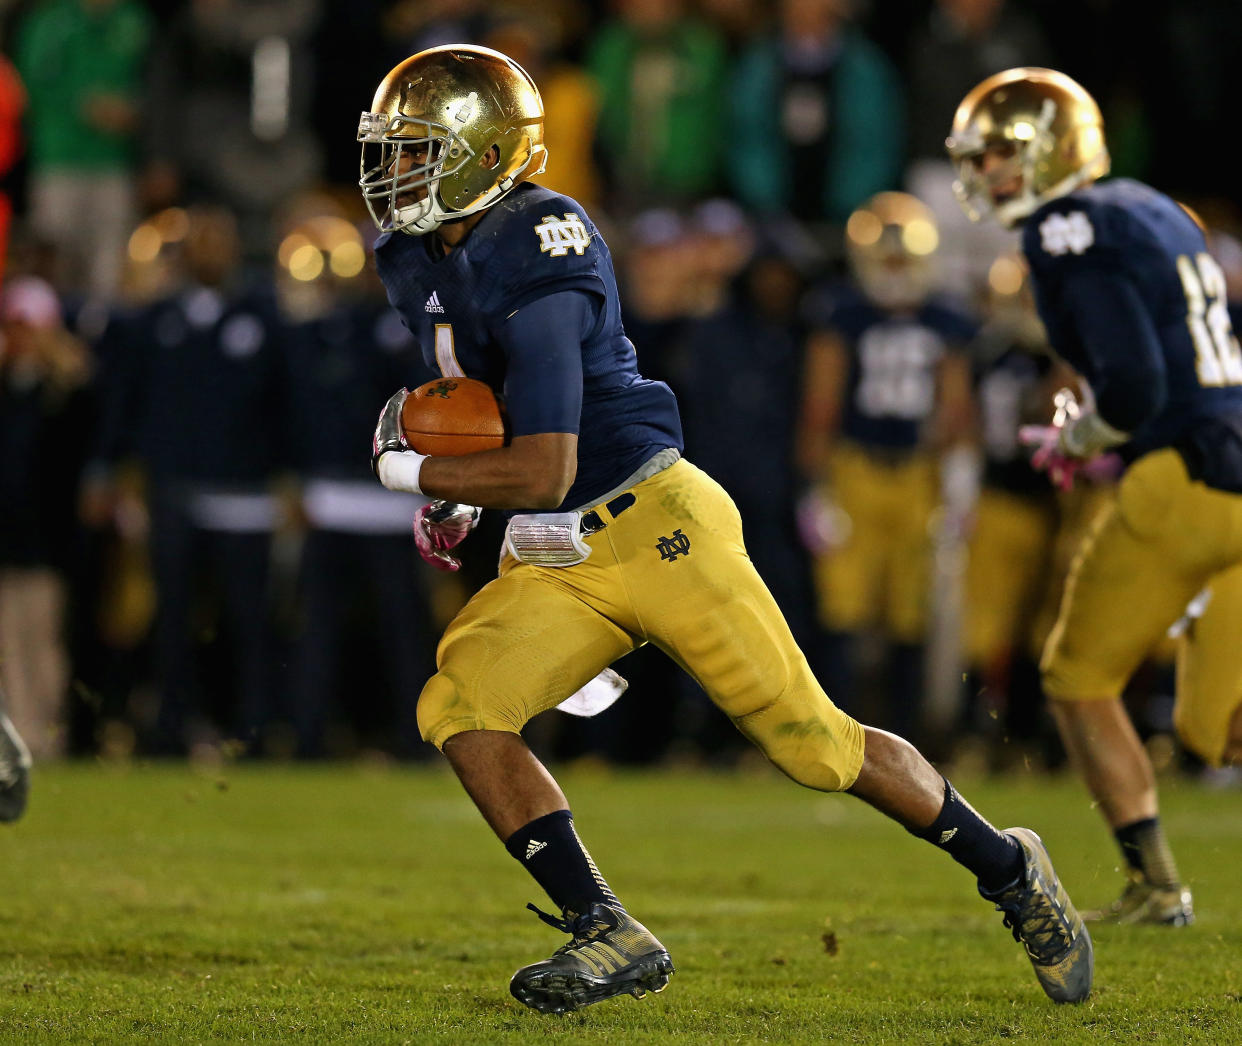 Former Notre Dame running back George Atkinson III has died at age 27. (Photo by Jonathan Daniel/Getty Images)